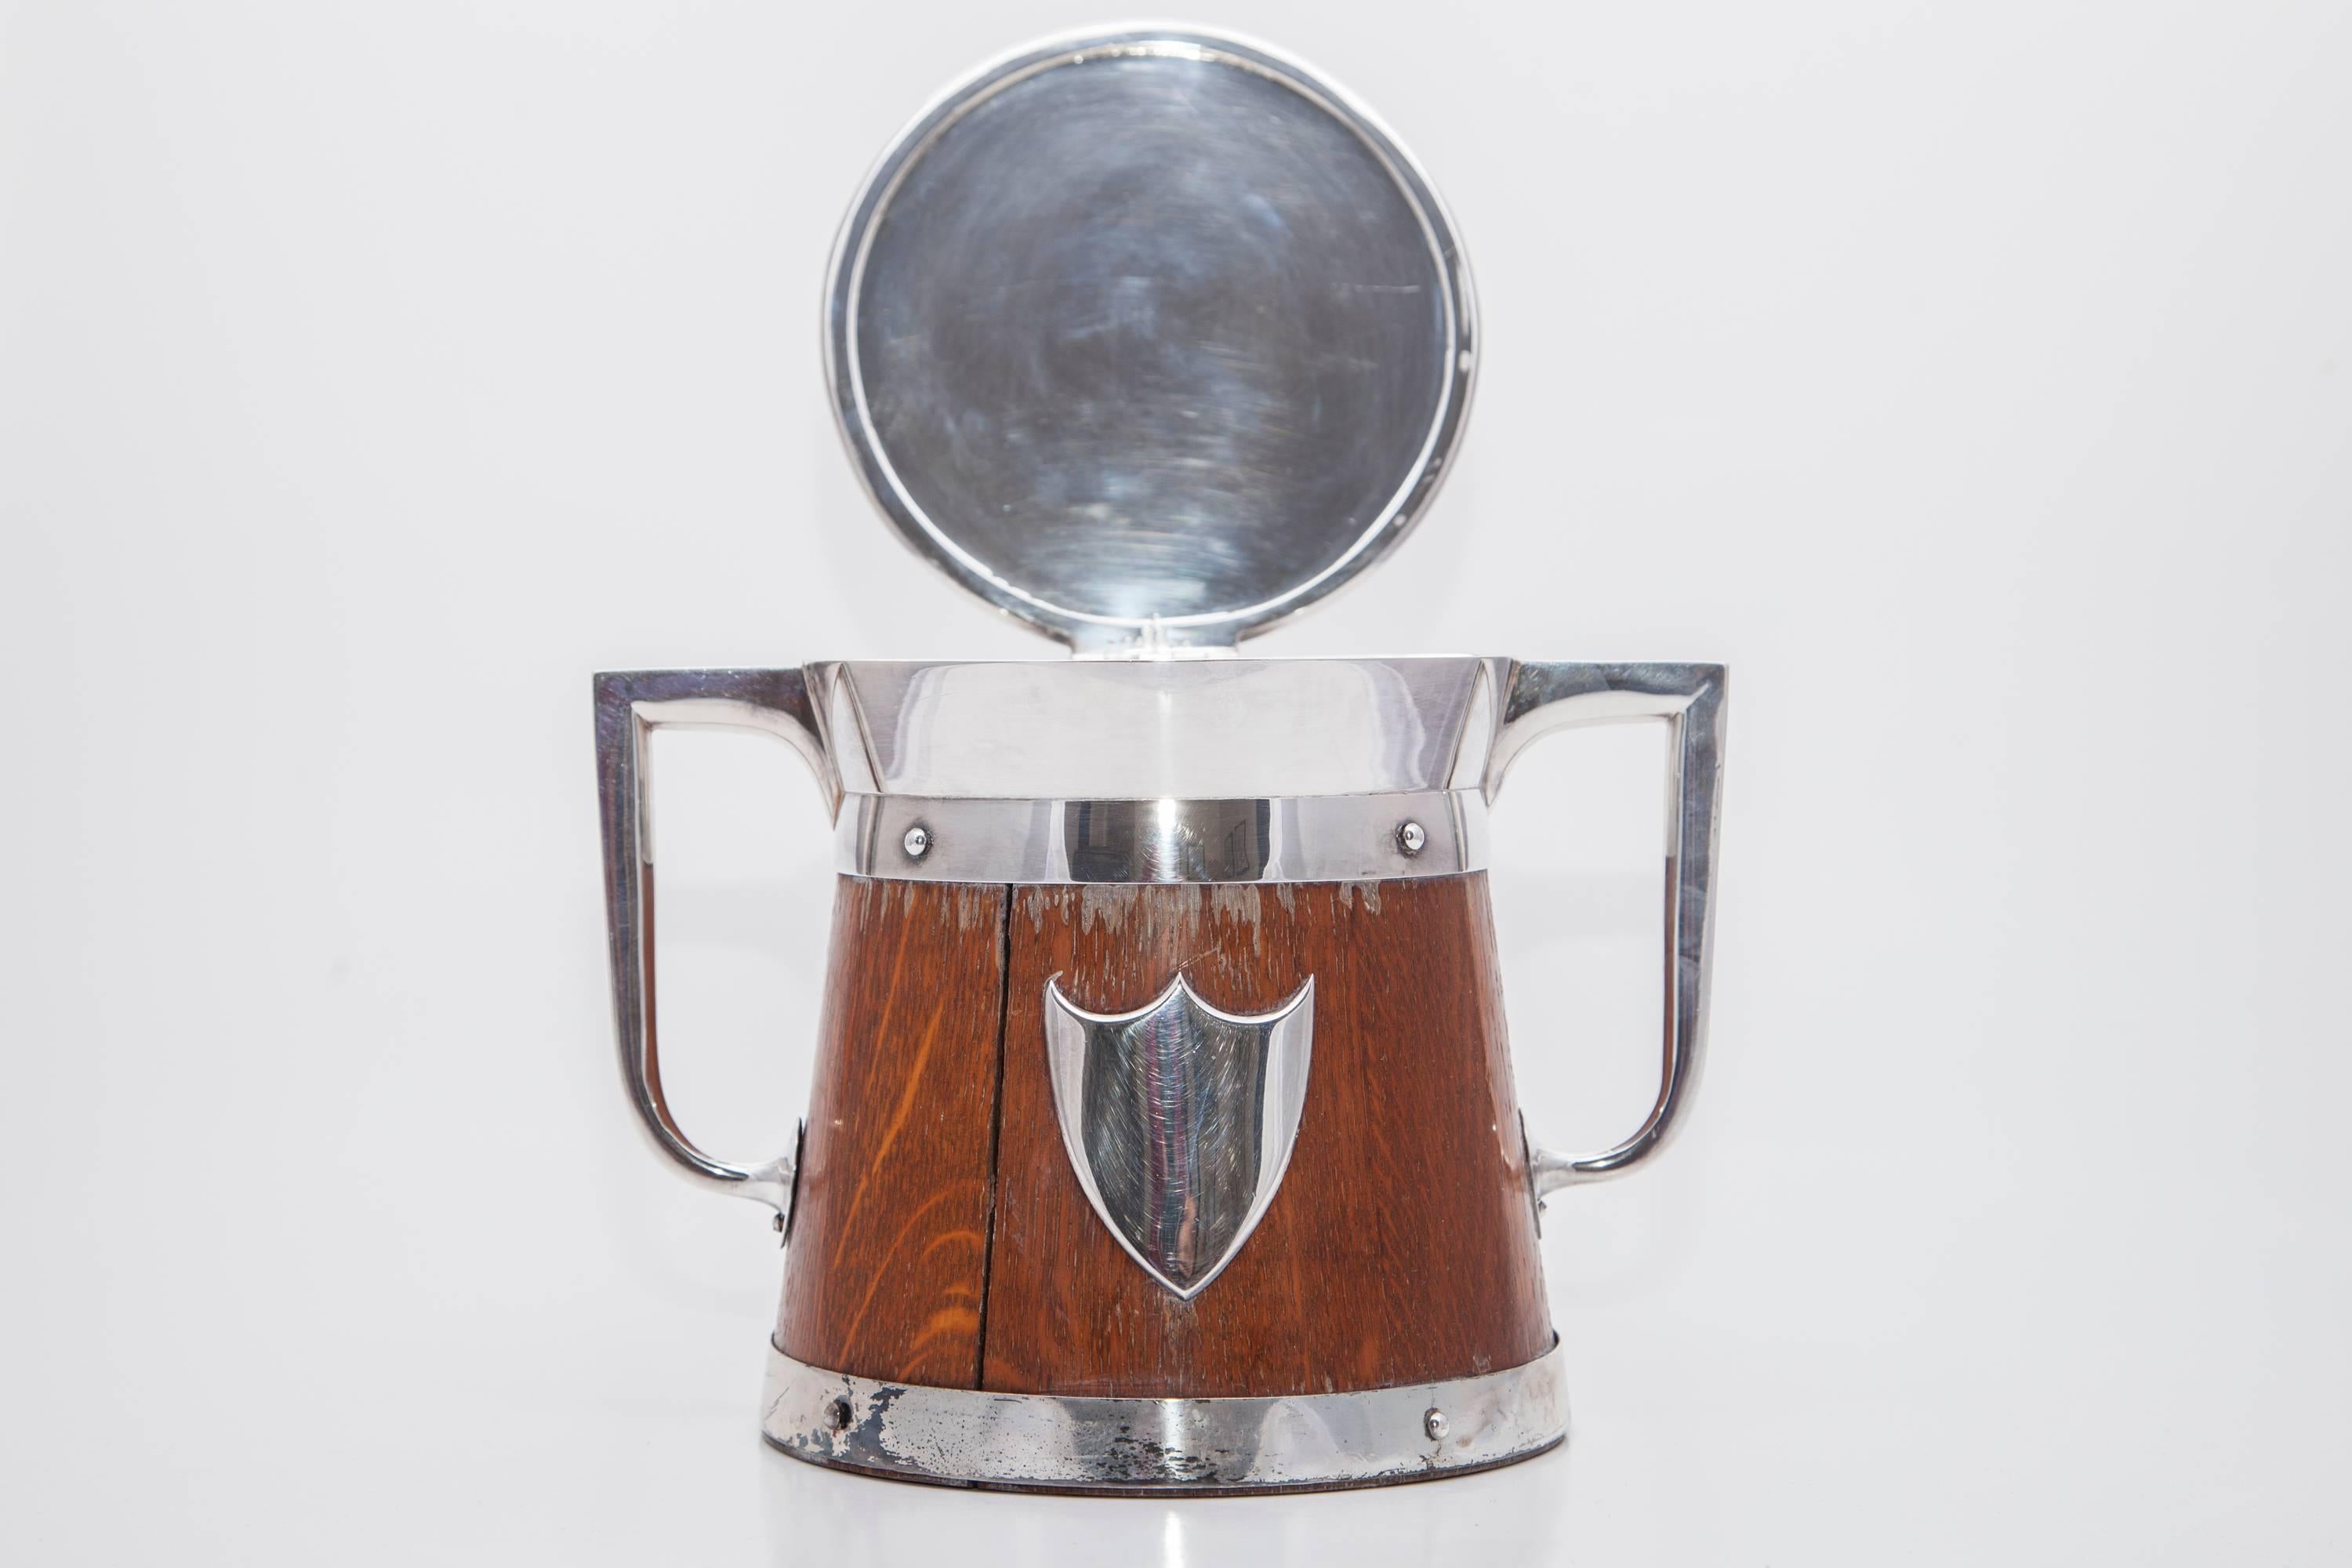 19th Century Wooden treen ice bucket with silver crest embellishment. The ice bucket has a porcelain liner. 